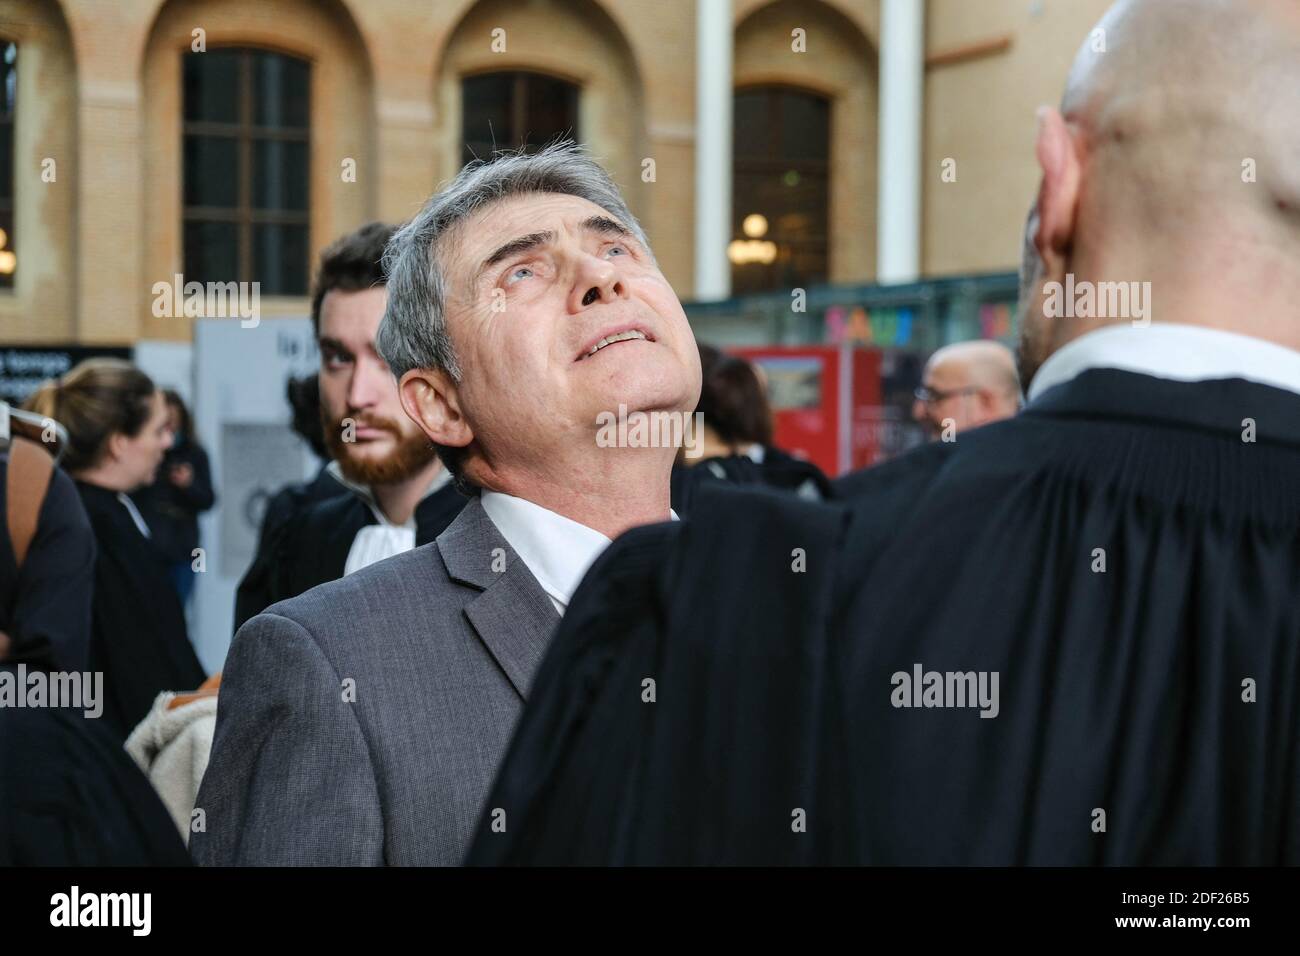 Manuel FURET, President of the Toulouse Bar during demonstration of lawyers  in front of the Palais de Justice in Toulouse, France on February 4, 2020.  They have been mobilized for several weeks